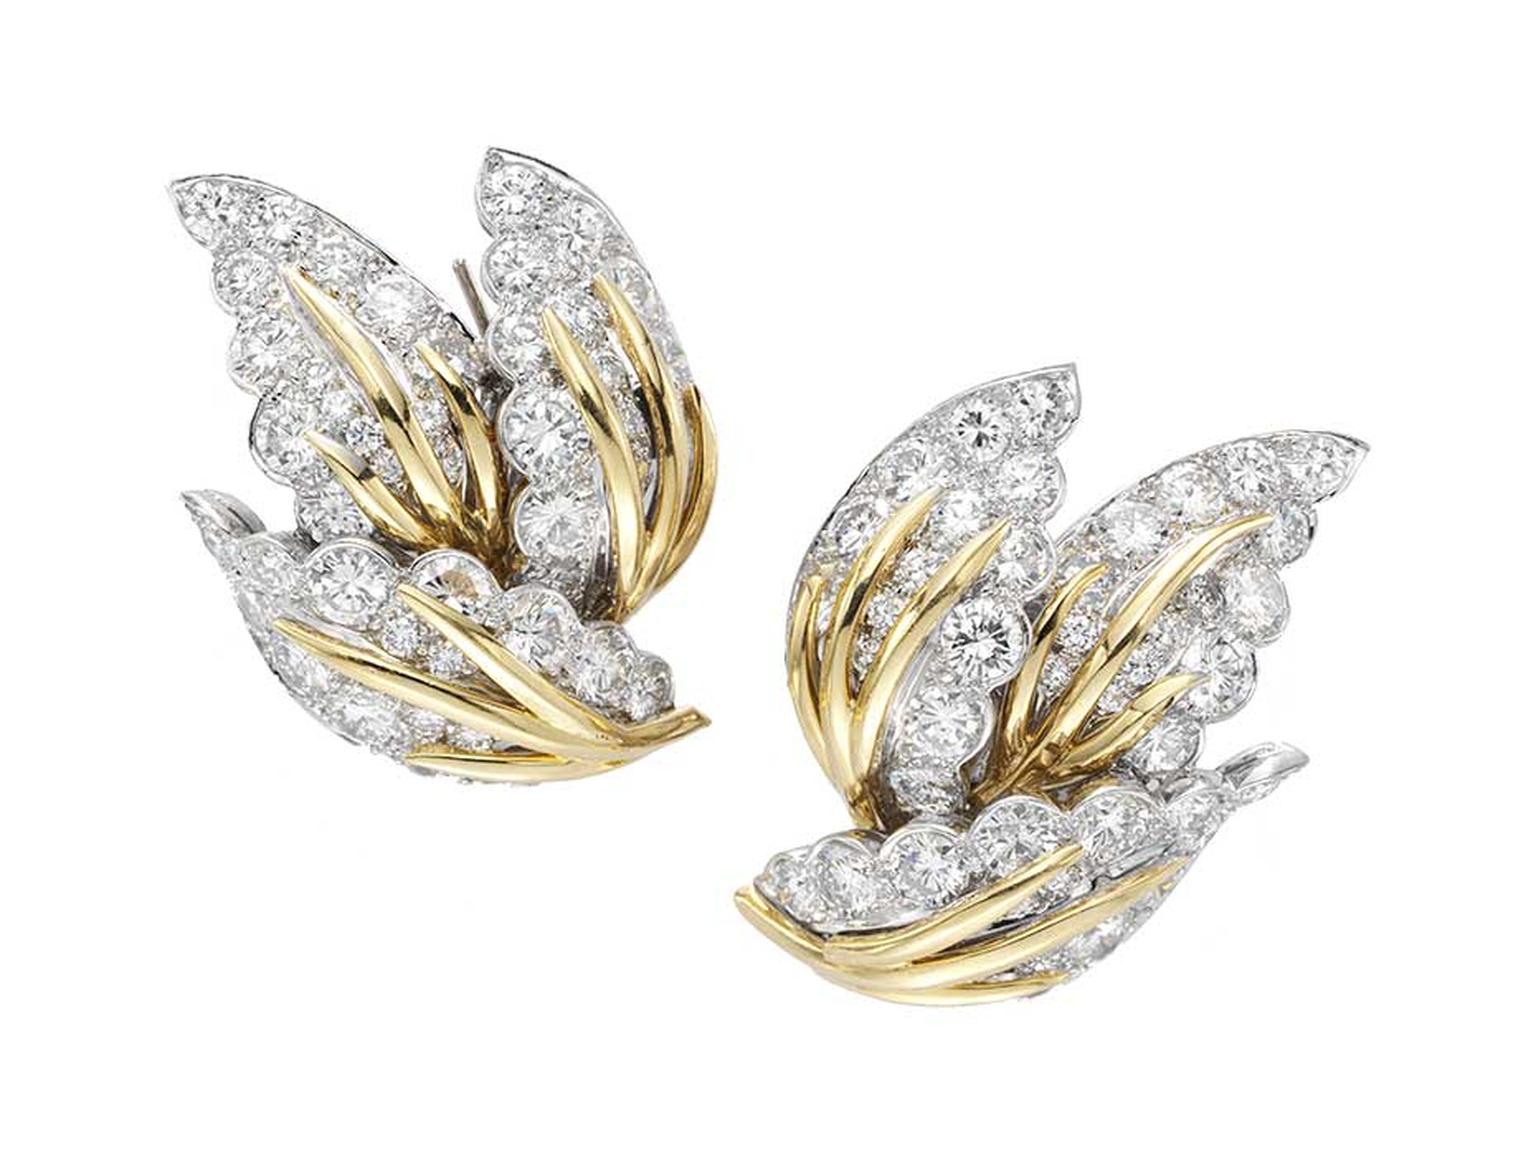 Worn by Dita von Teese to the 2014 Met Ball, the Van Cleef & Arpels Three Leaves Estate earrings featuring diamonds set in platinum, white and yellow gold.